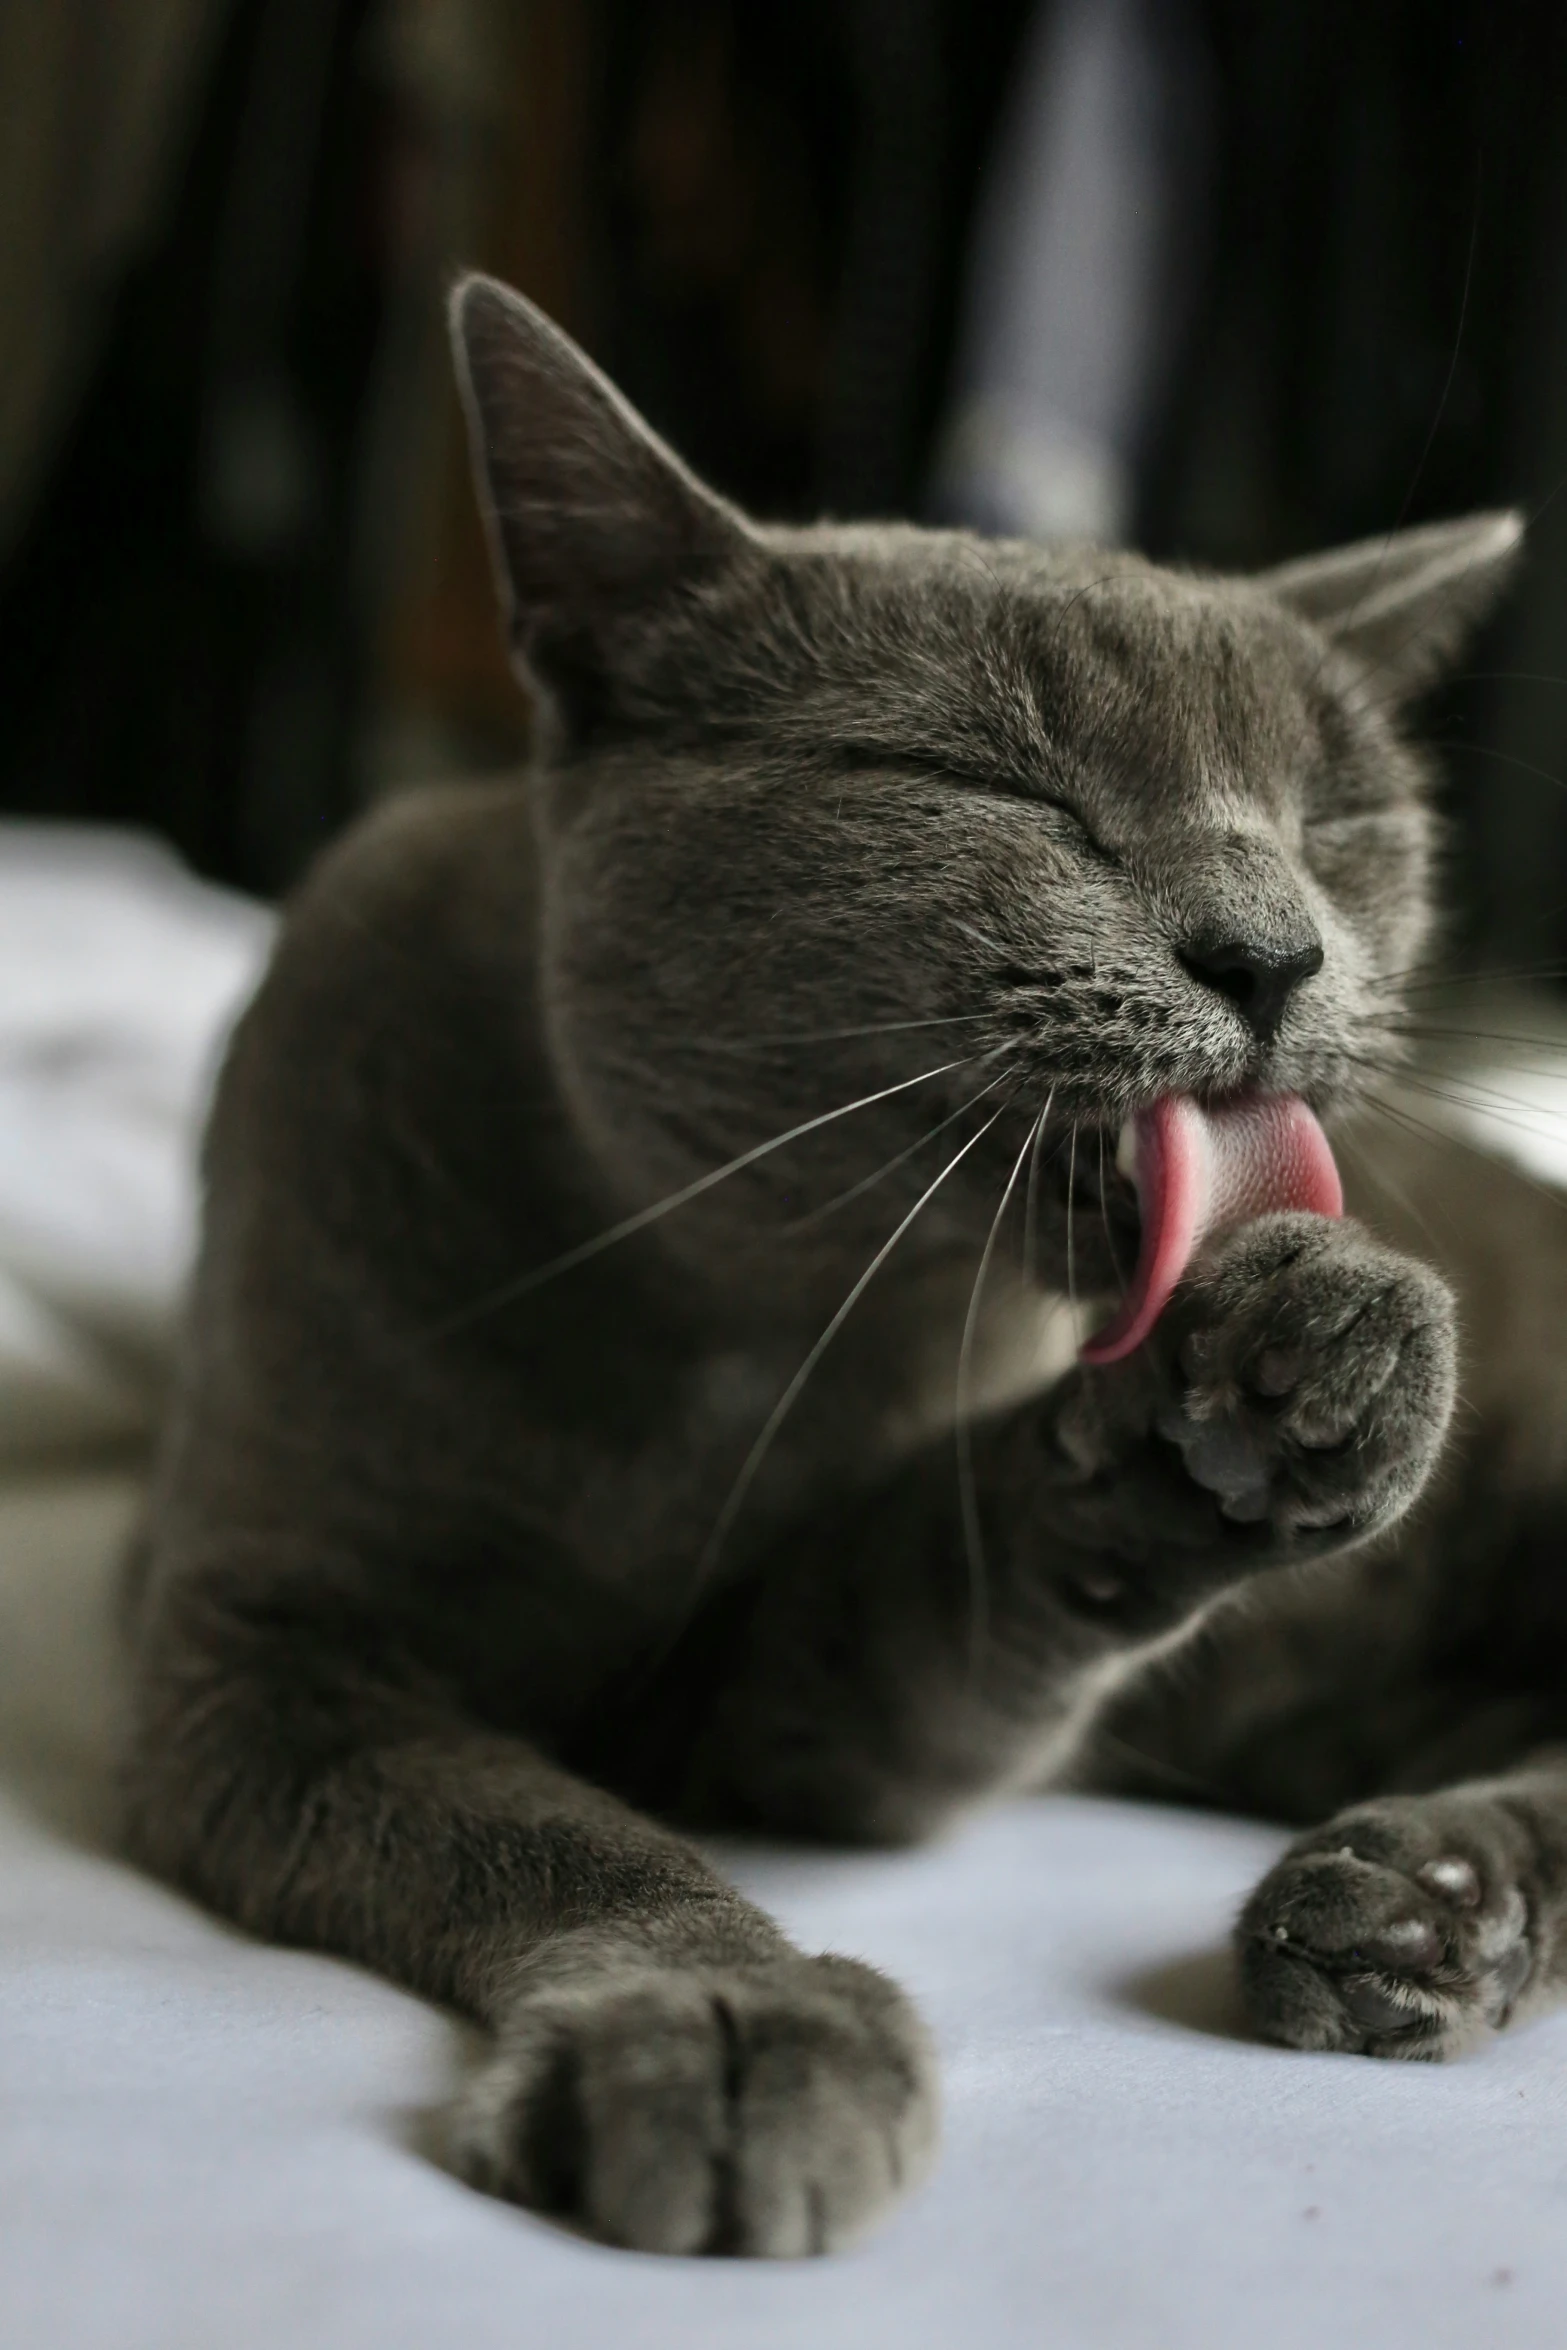 grey cat yawning on bed in room